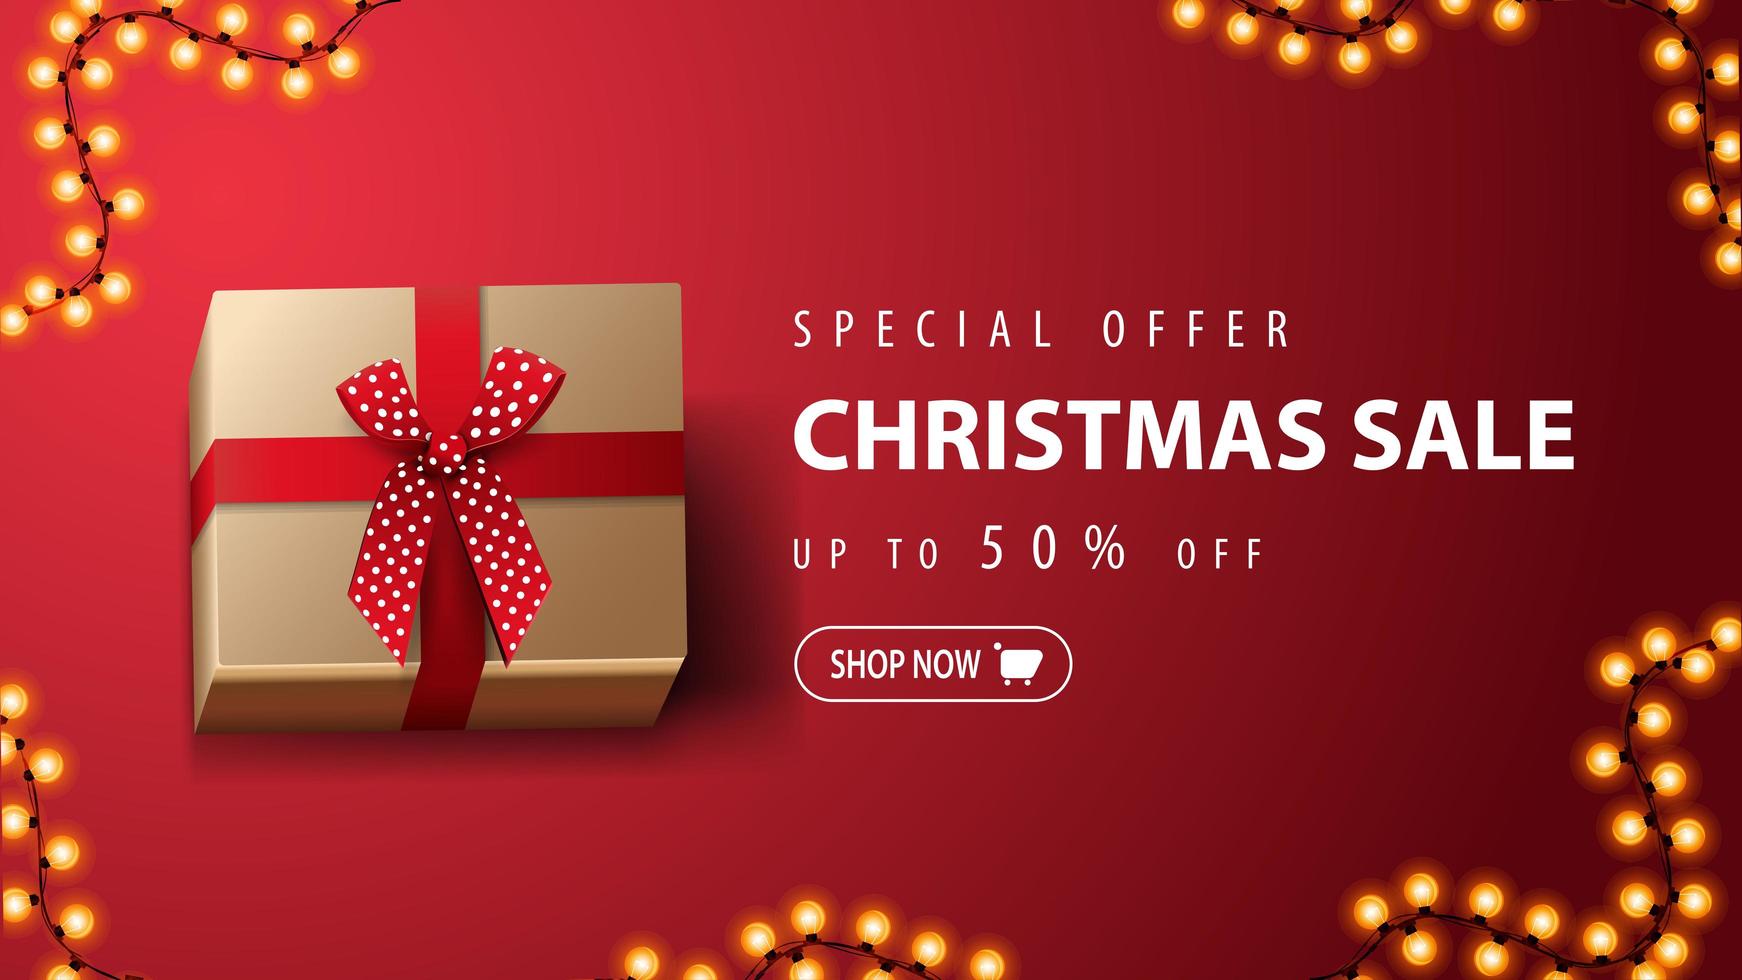 Special offer, Christmas sale, up to 50 off, red discount banner with present with red bow on red background, top view vector